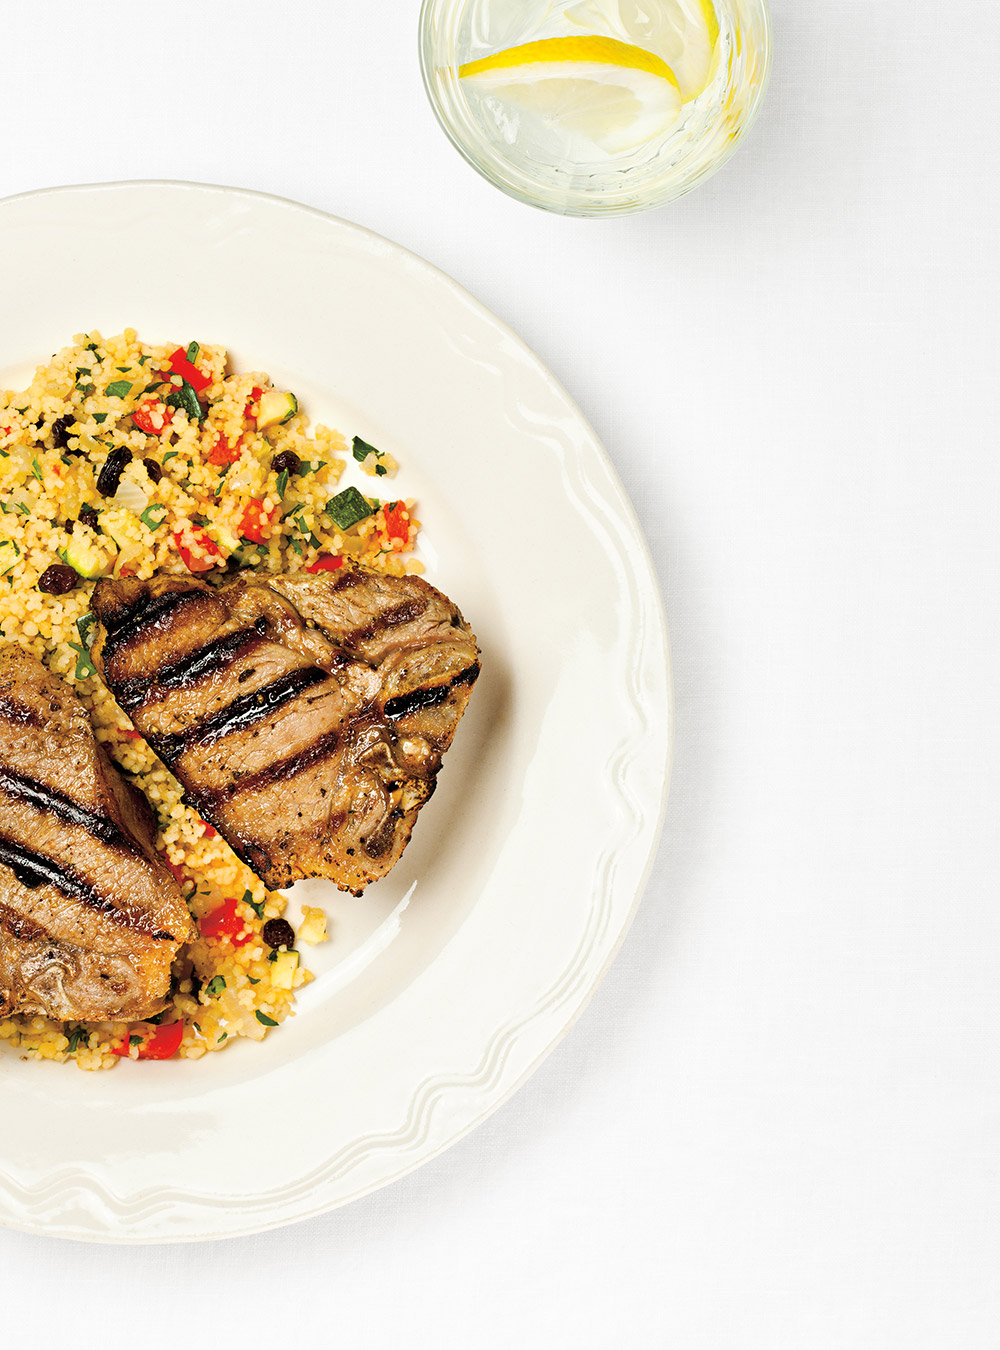 Spiced Lamb Chops with Vegetable Couscous